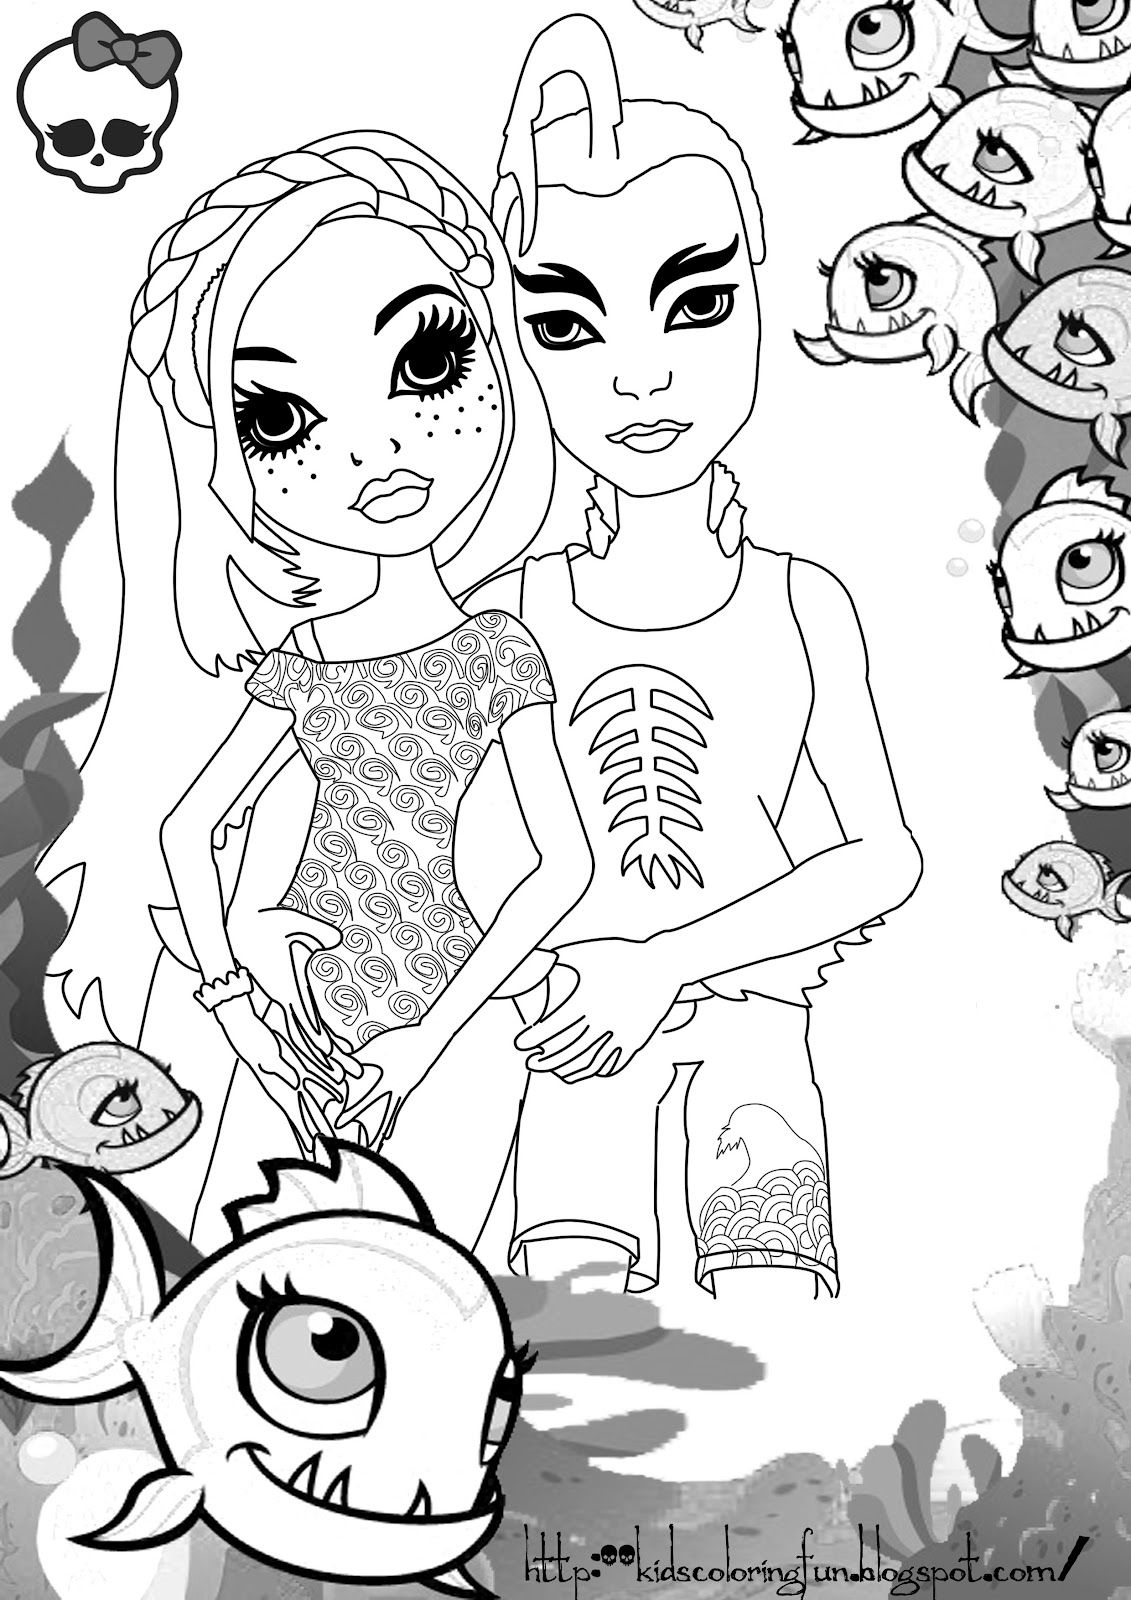 Monster High Lagoona Coloring Pages_1 title=